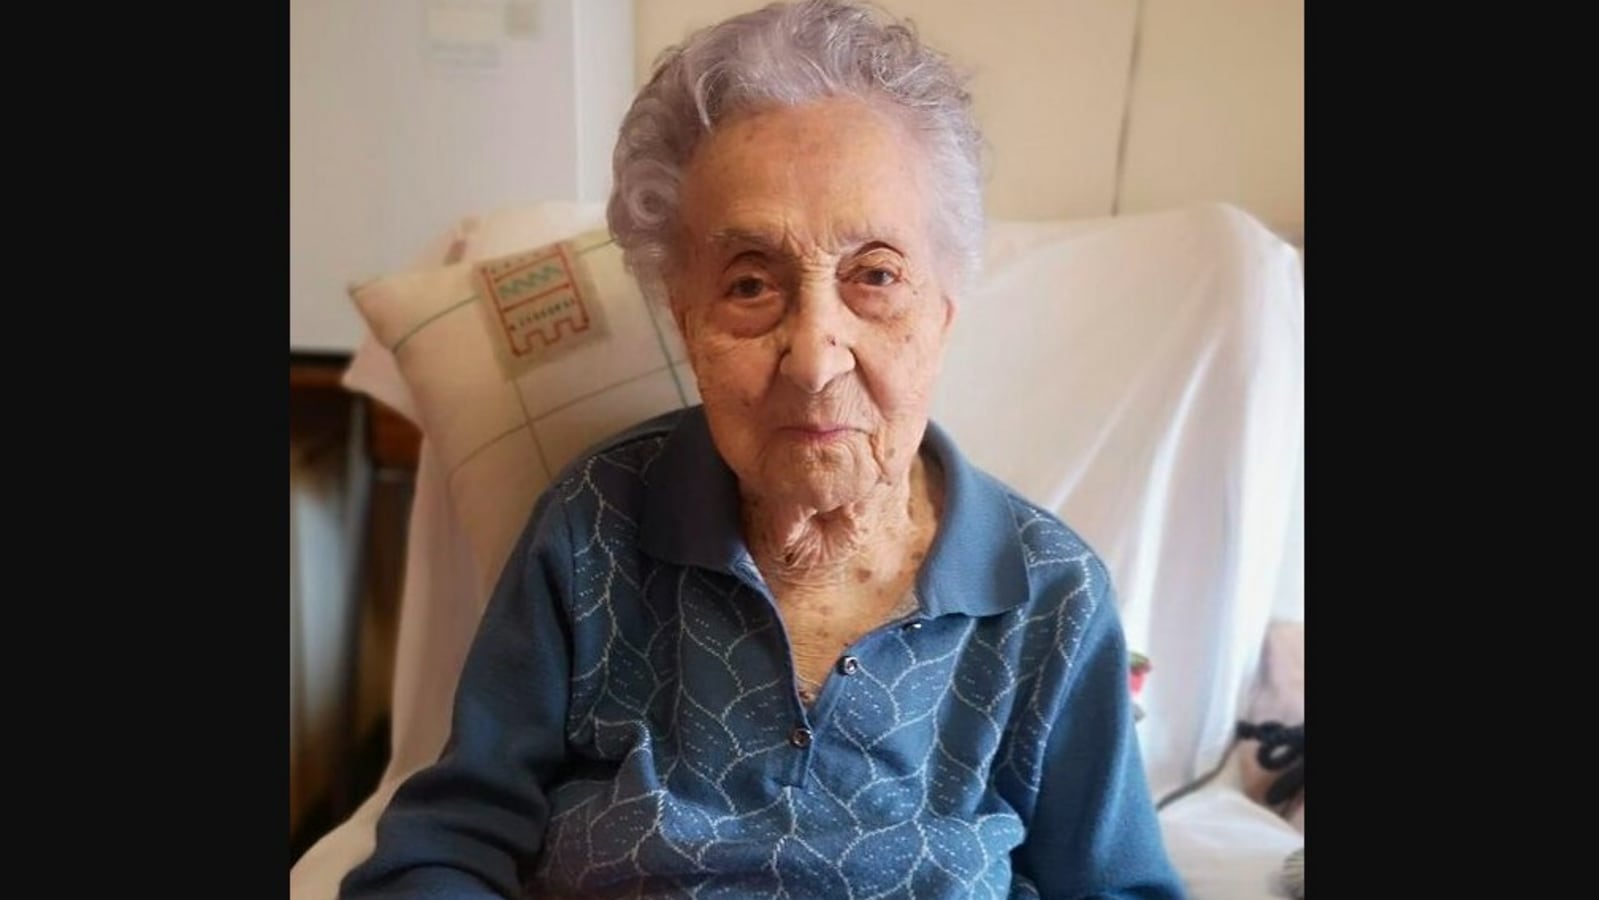 Woman world’s oldest living person at 115, shares secrets of